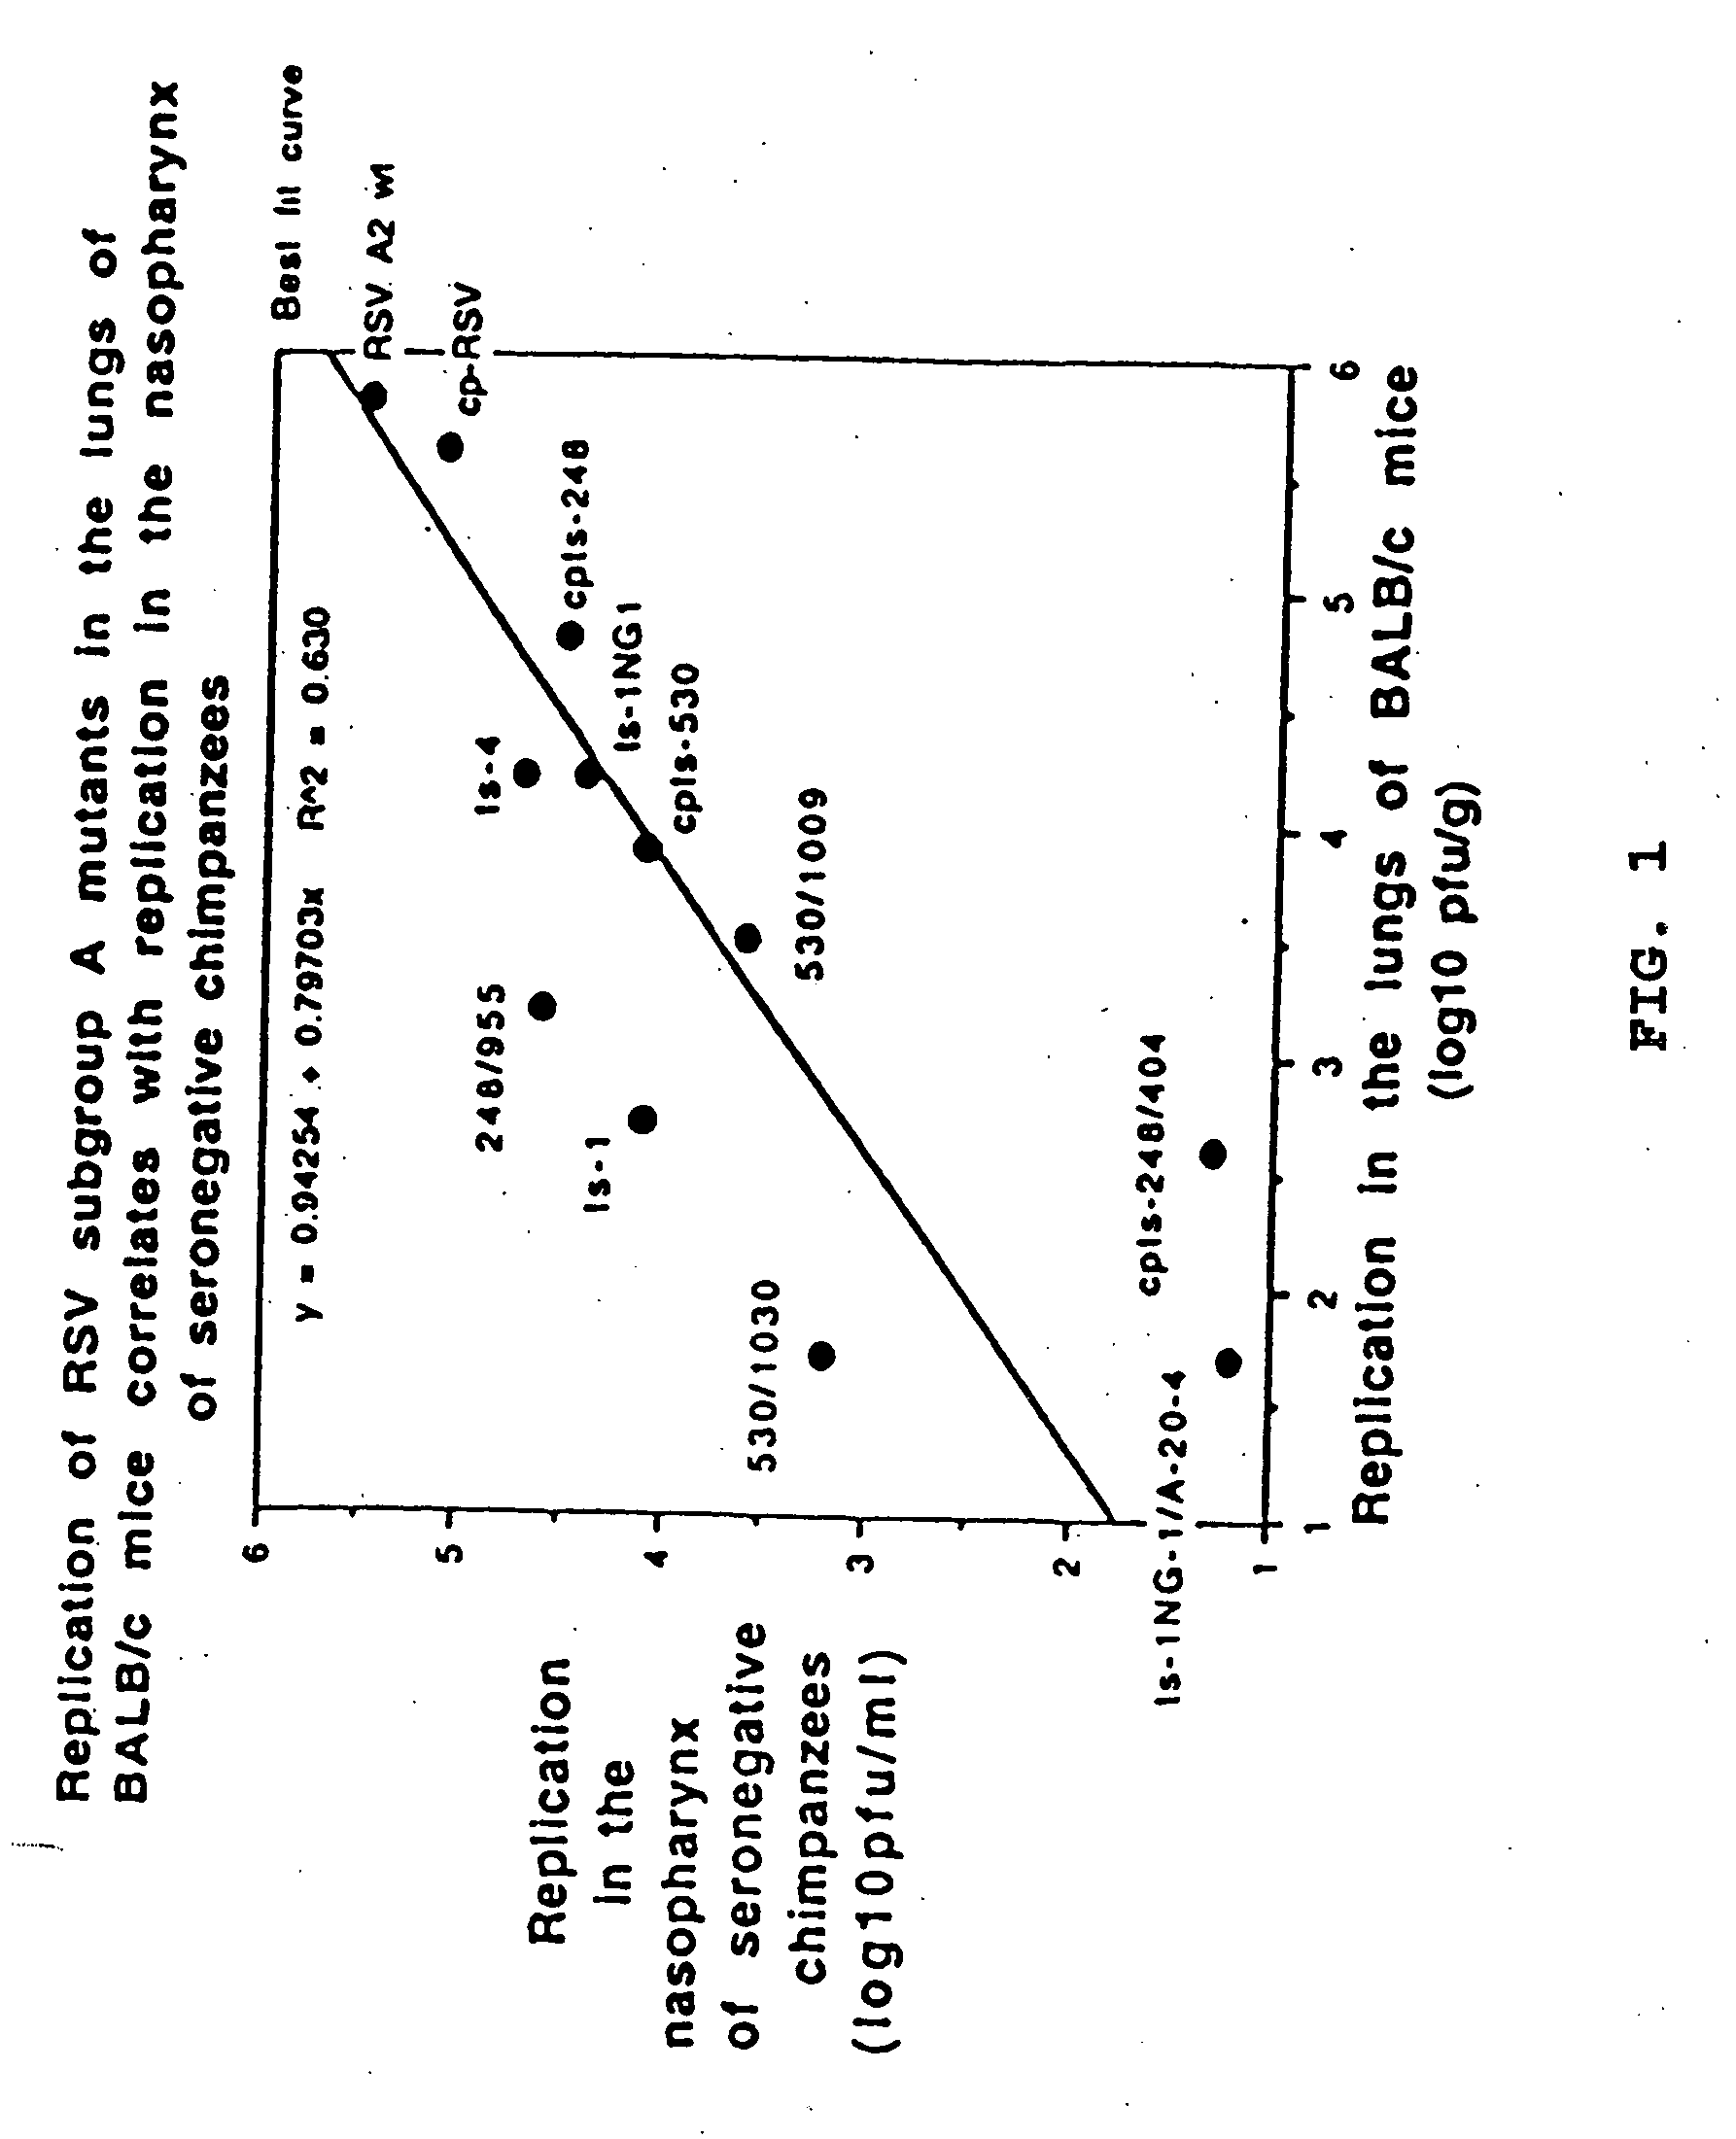 Production of attenuated respiratory syncytial virus vaccines from cloned nucleotide sequences